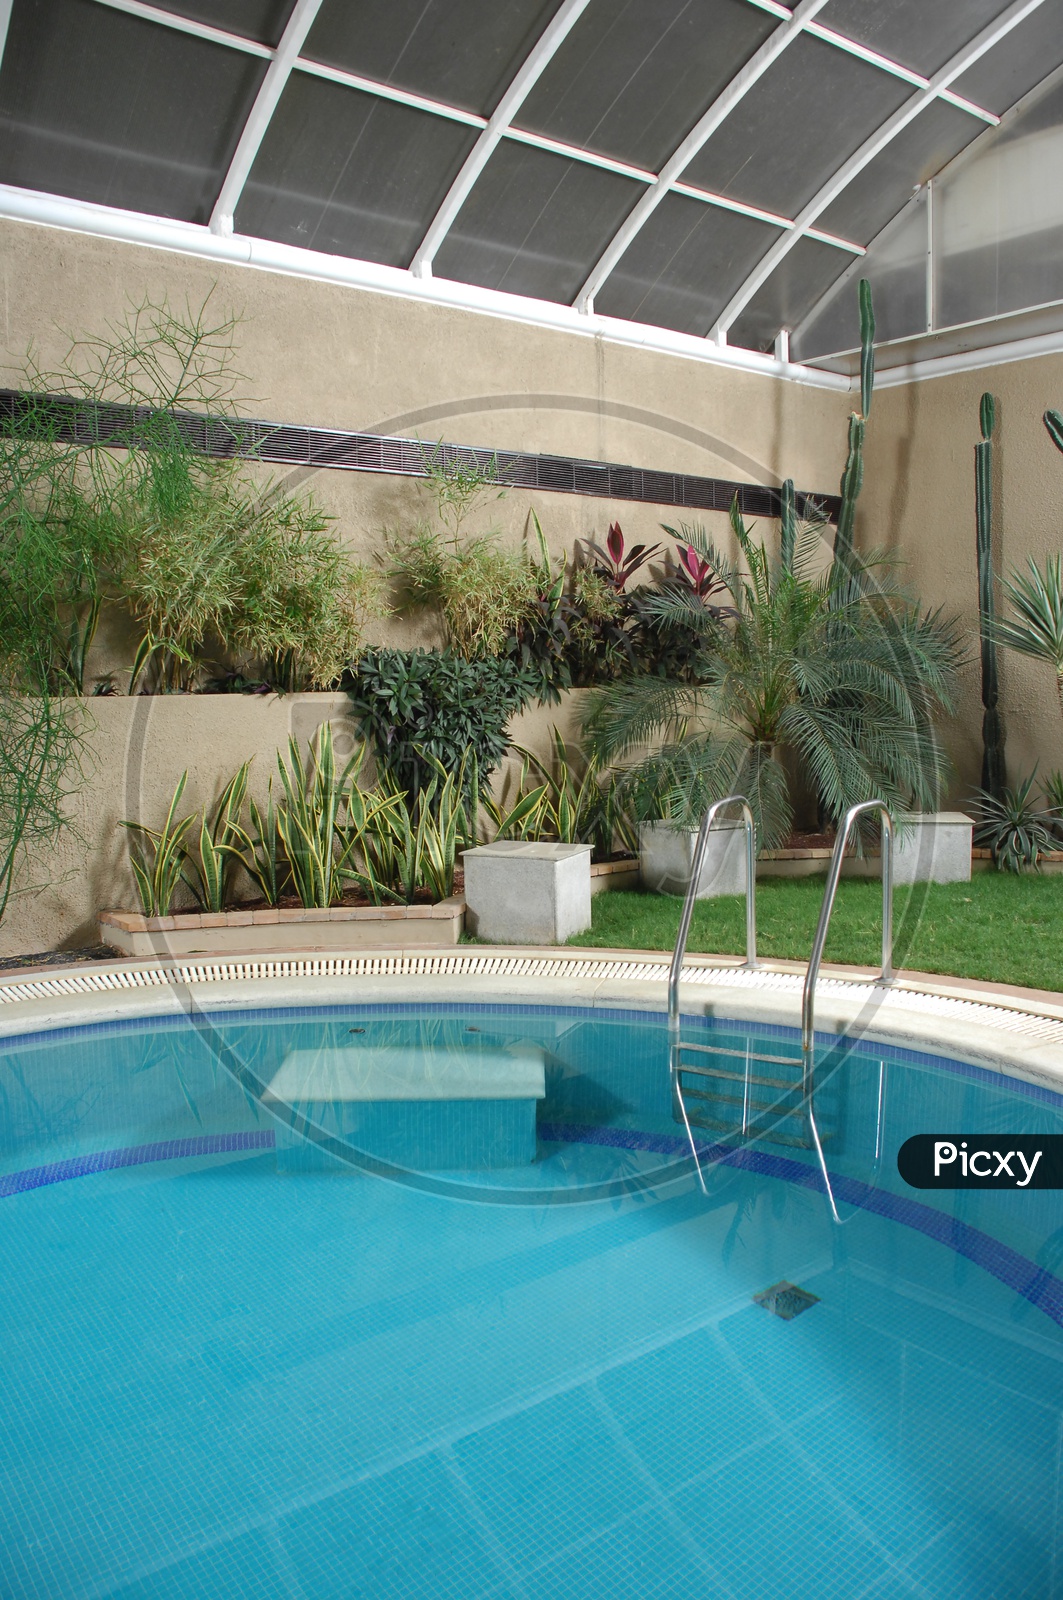 Backyard Swimming pool with plants and lawn around